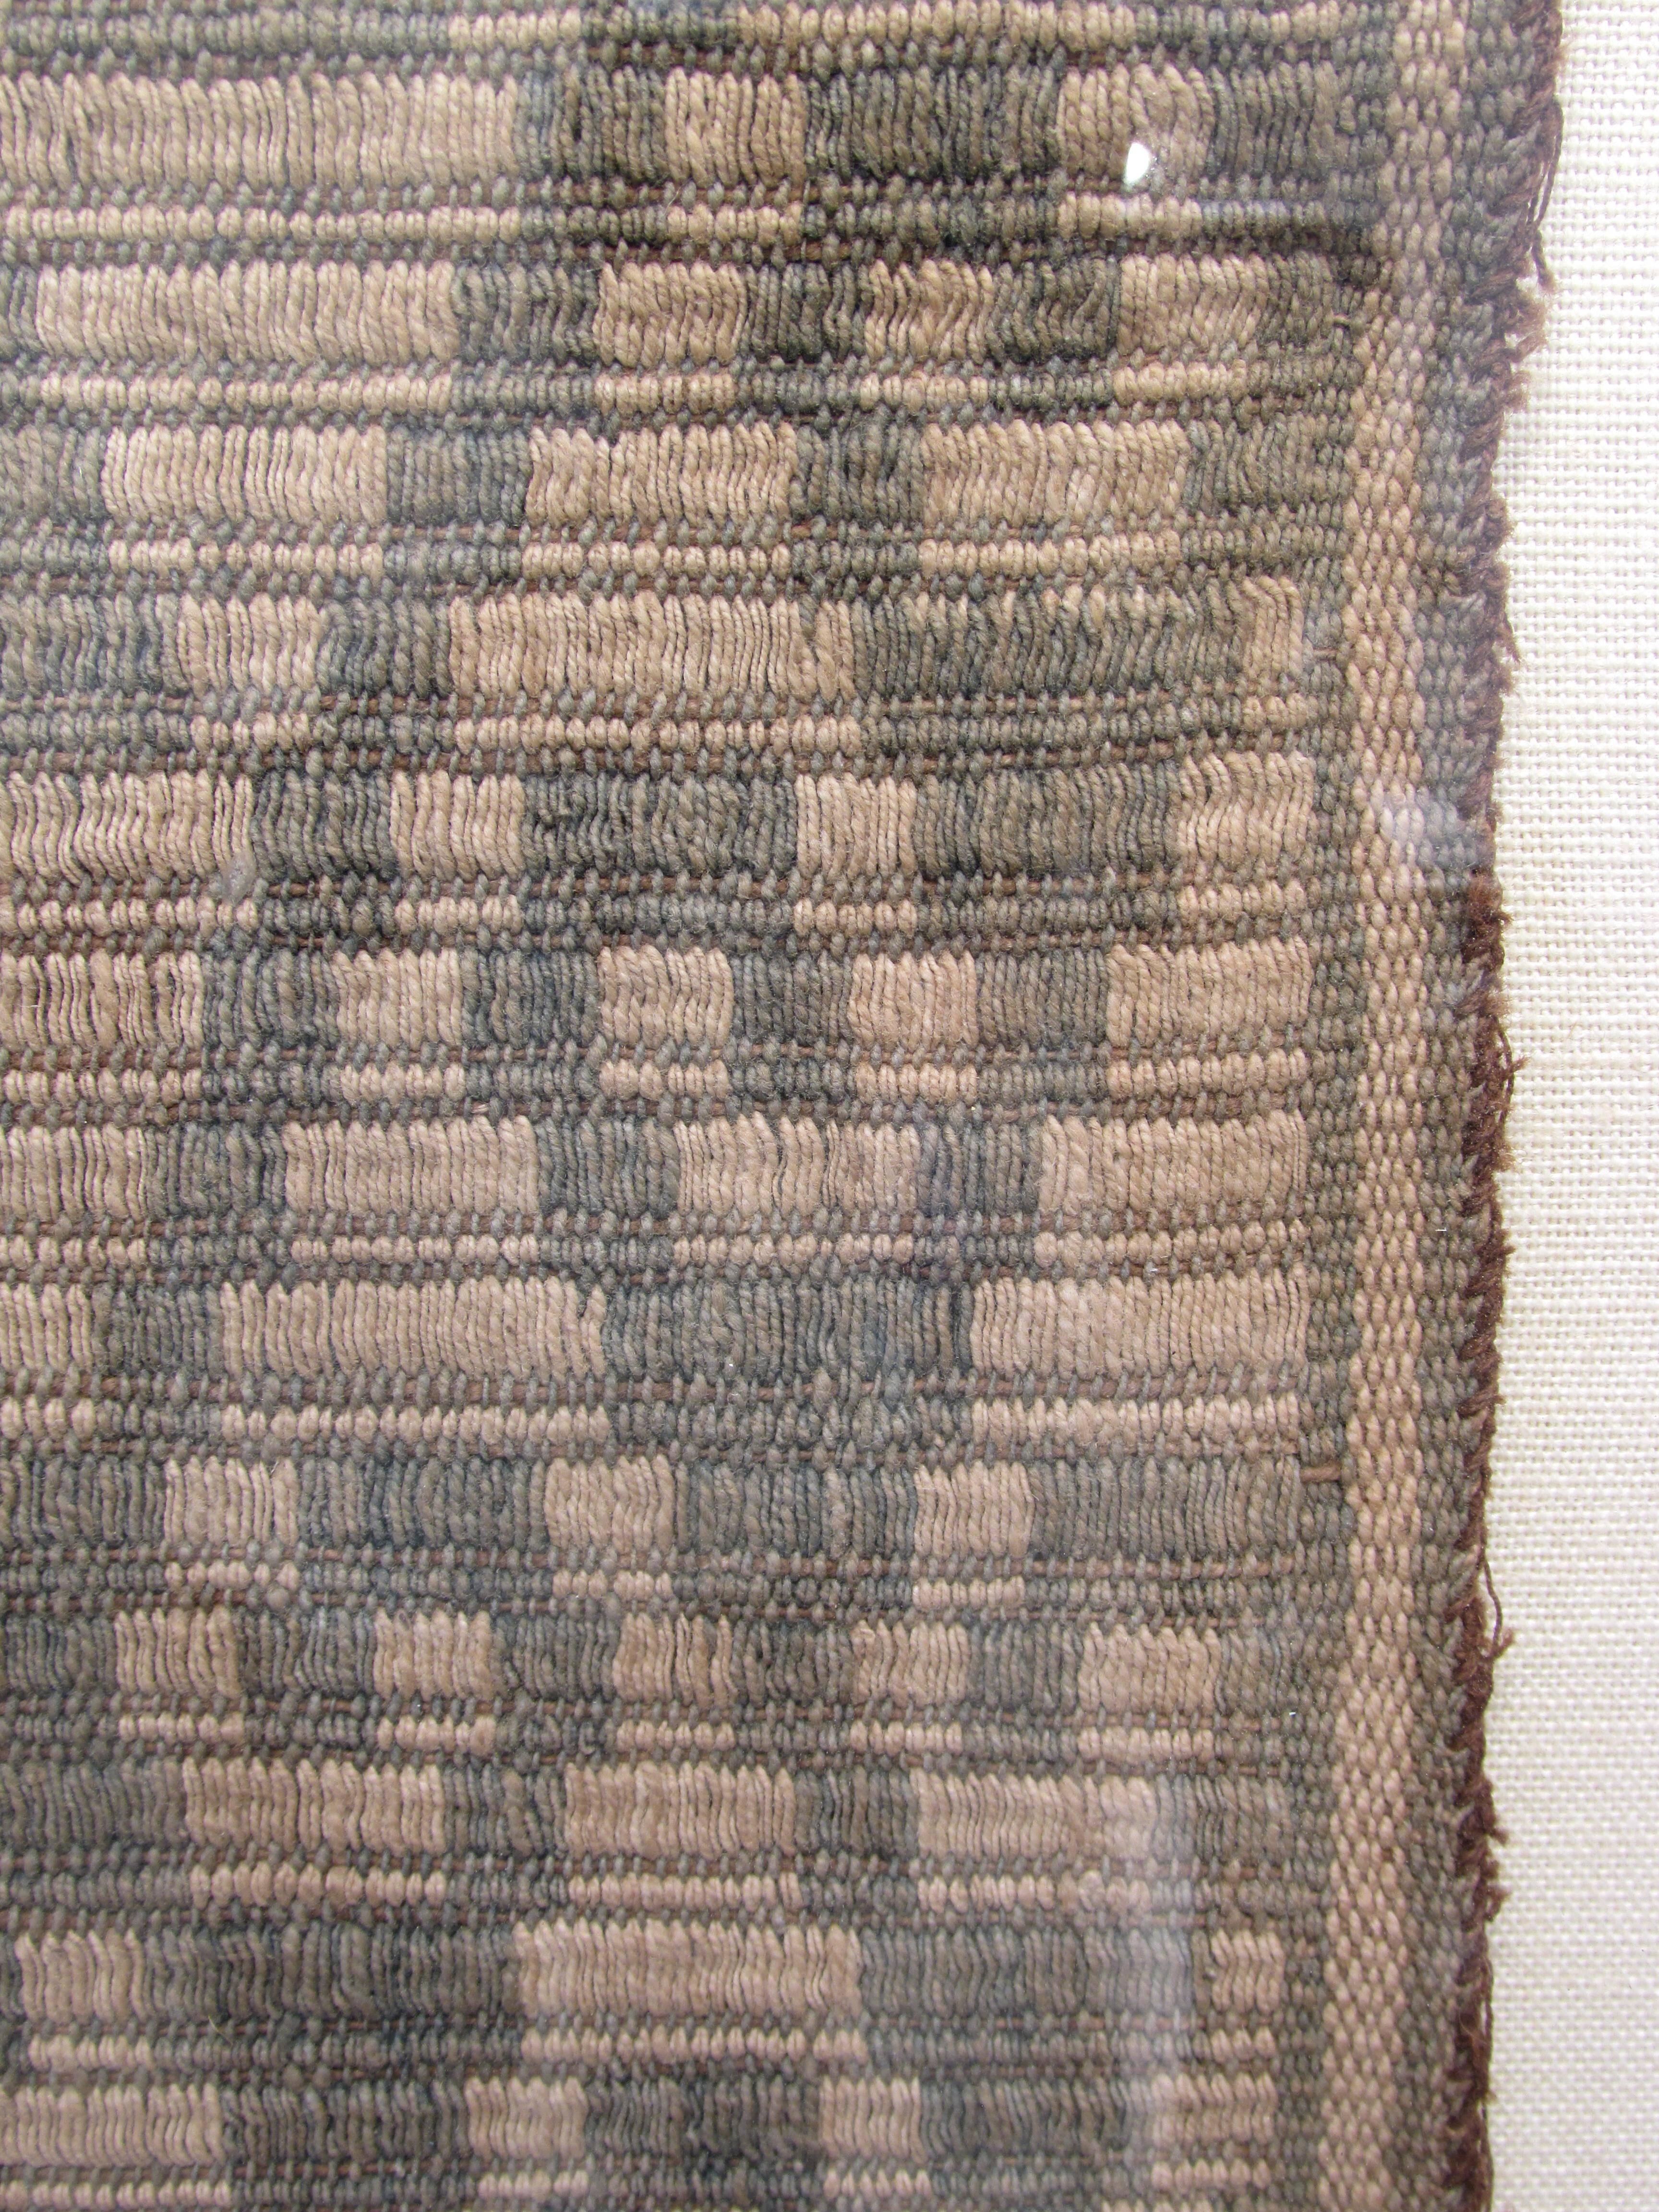 Pre-Colombian Fabric from Peru 3